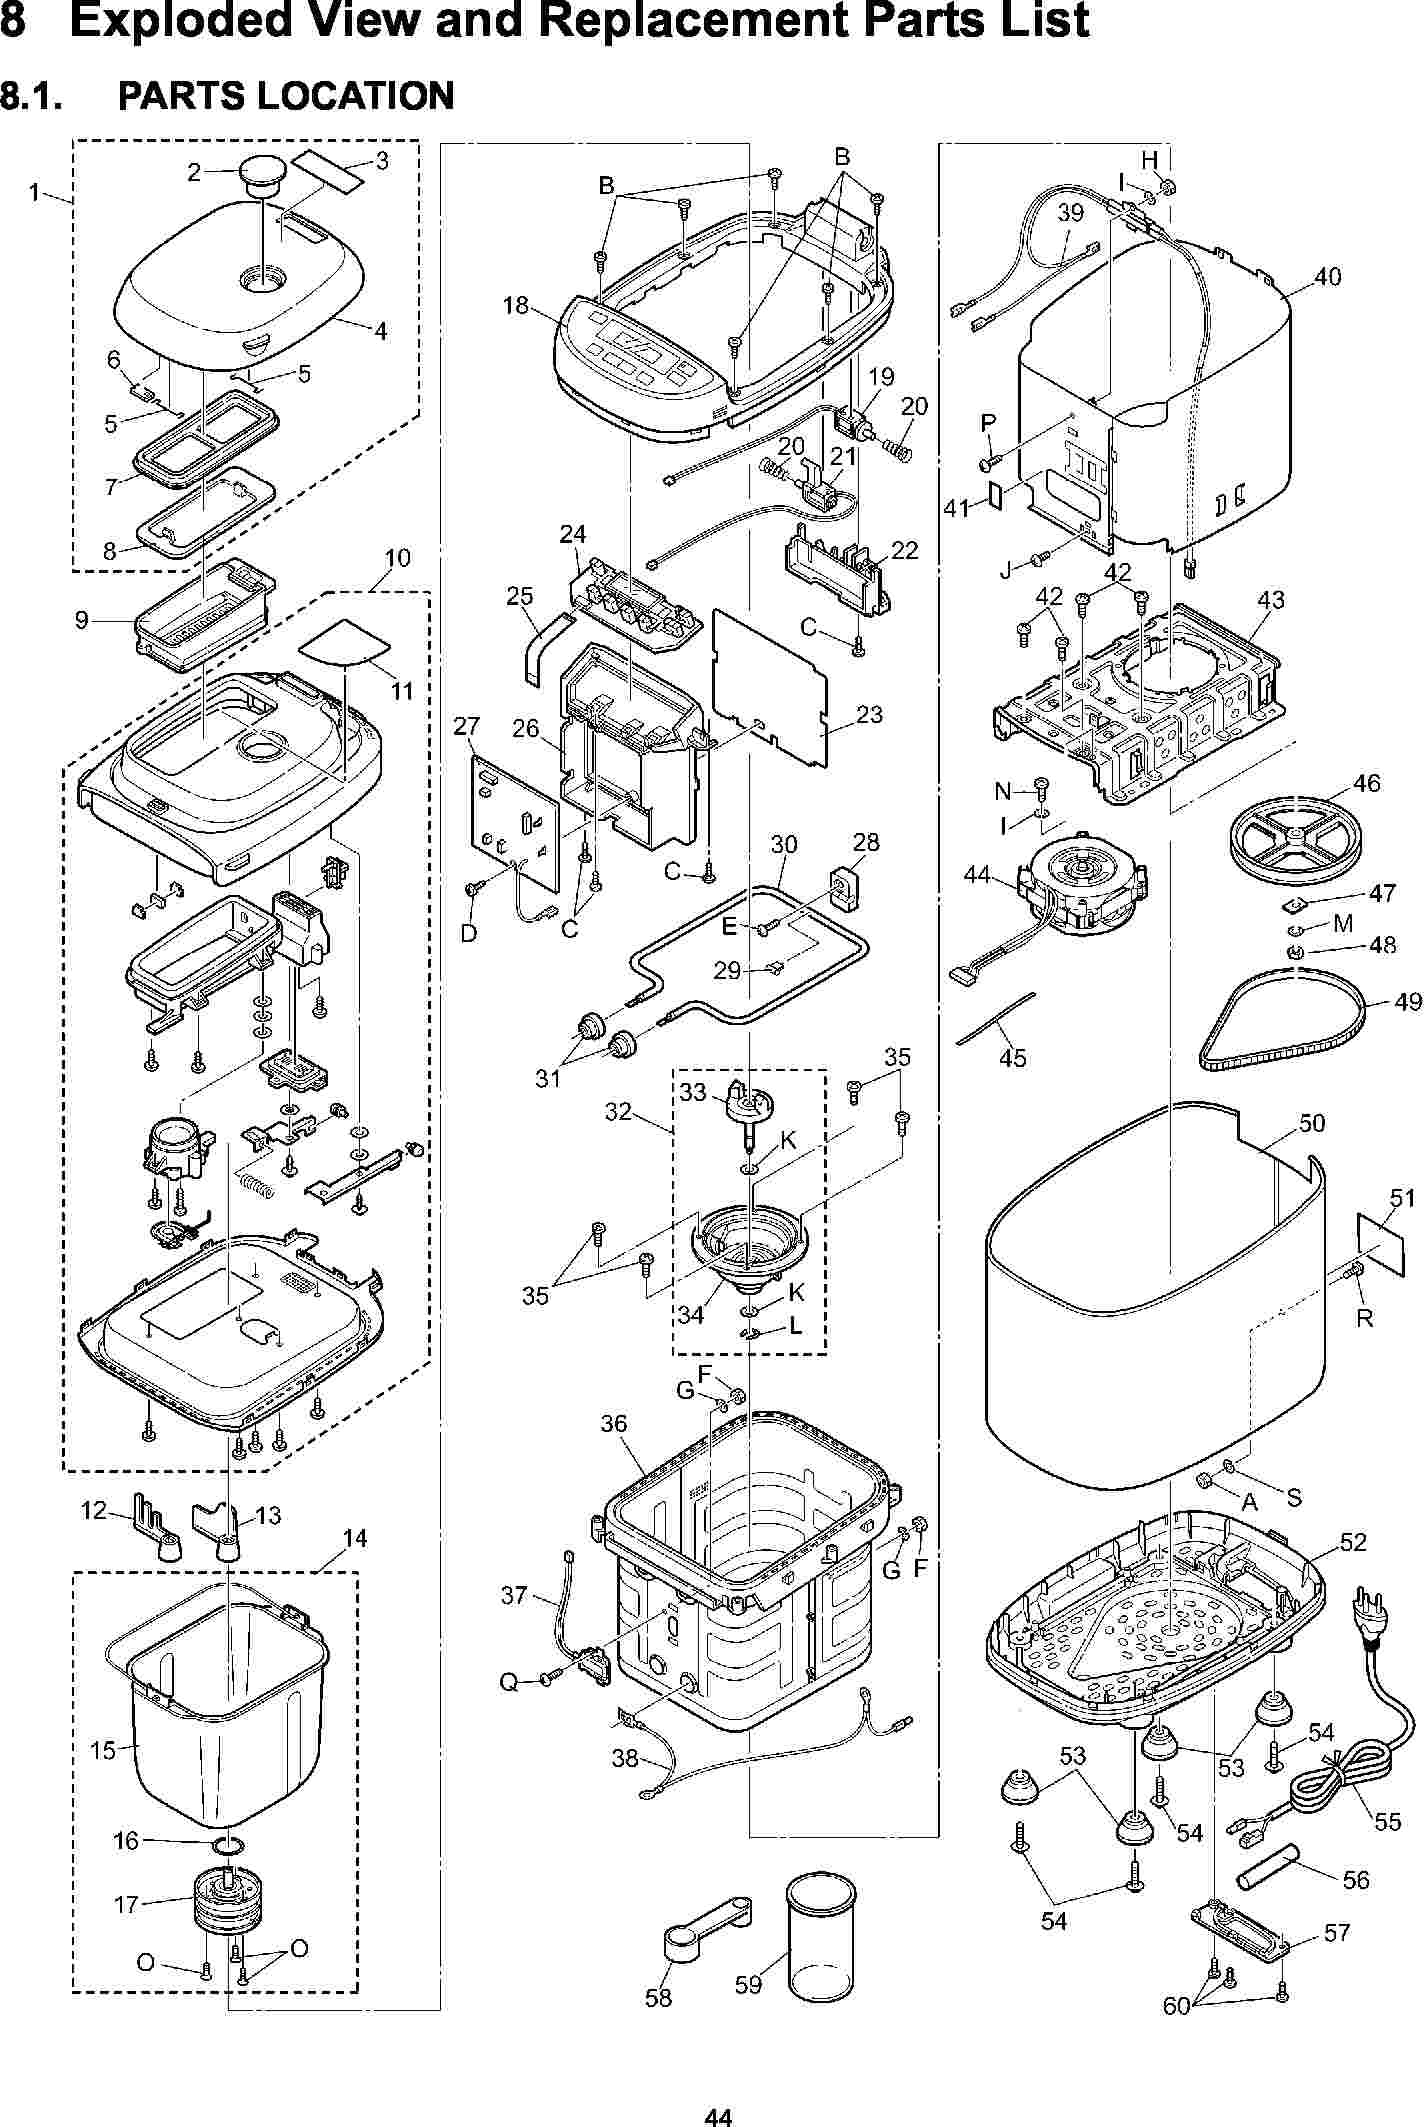 SD-ZB2502: Exploded View